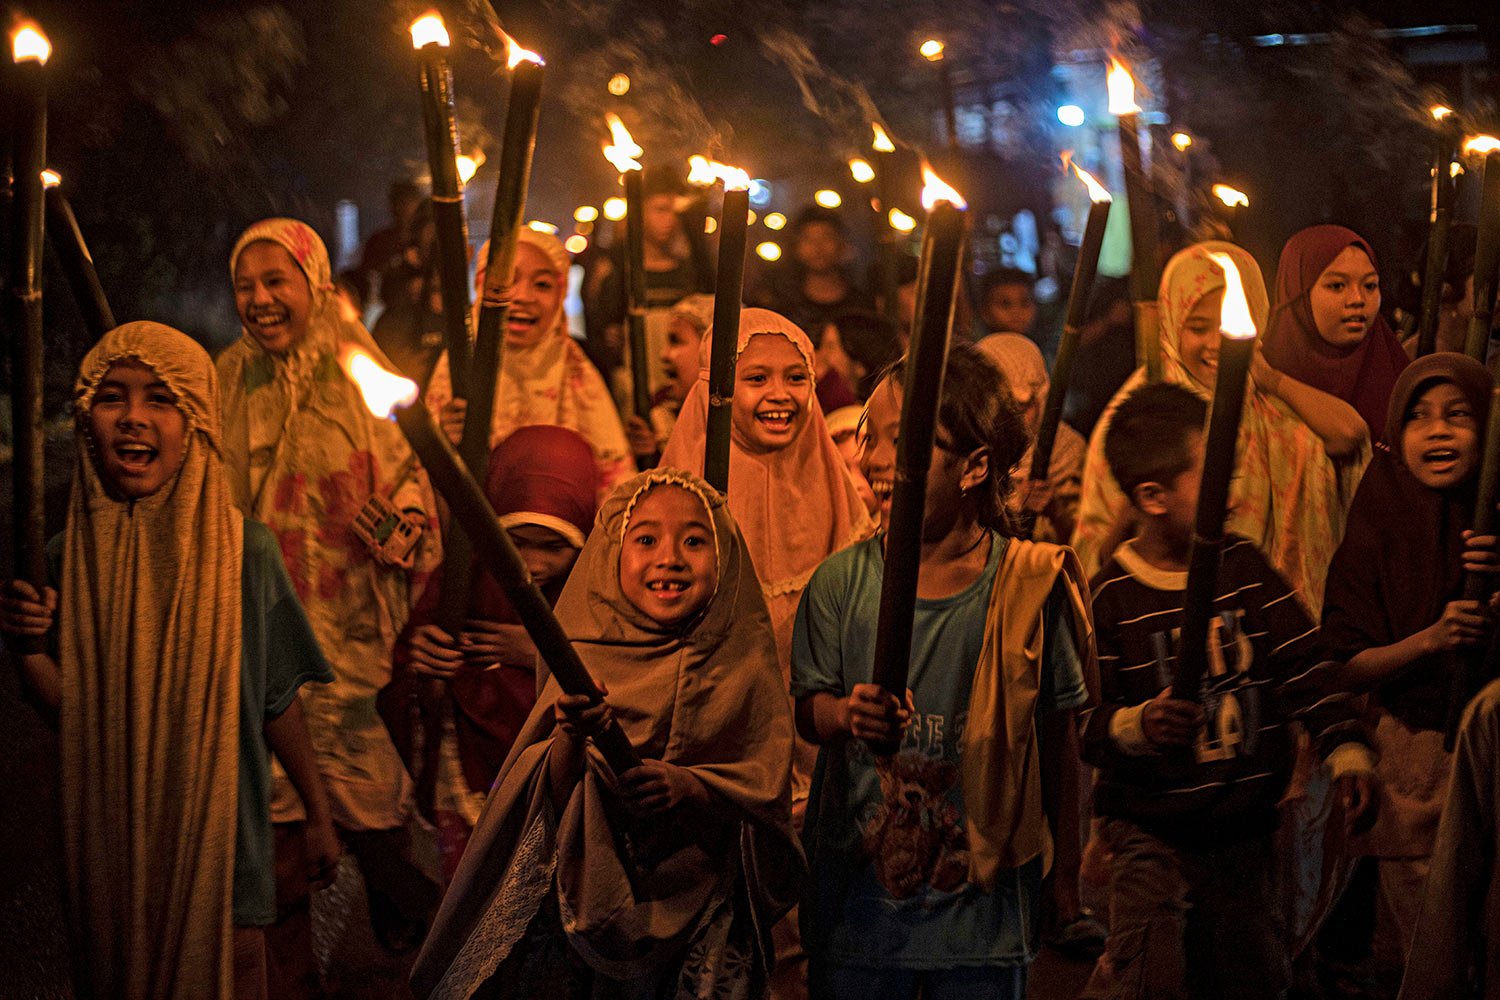  Muslim girls carry torches as they parade to celebrate the eve of Eid al-Fitr, the holiday marking the end of the holy fasting month of Ramadan, in Polewali Mandar, West Sulawesi, Indonesia, Friday, April 21, 2023. (AP Photo/Yusuf Wahil) 